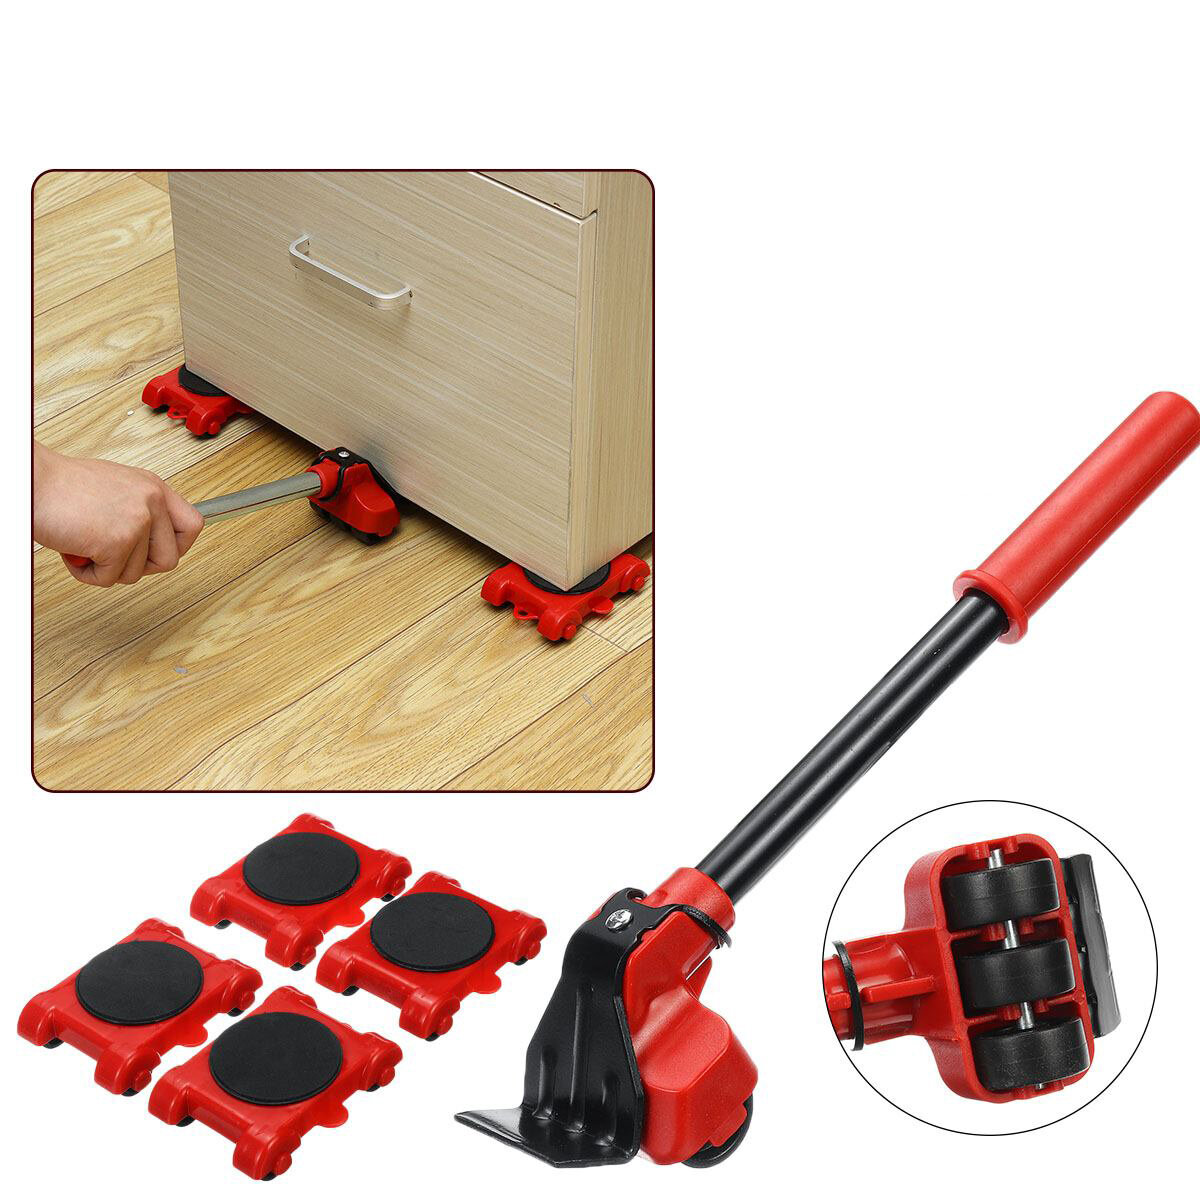 

5Pcs Furniture Movers Lifter Transport Tool Set Lift System with 1 Lifter & 4 Sliders